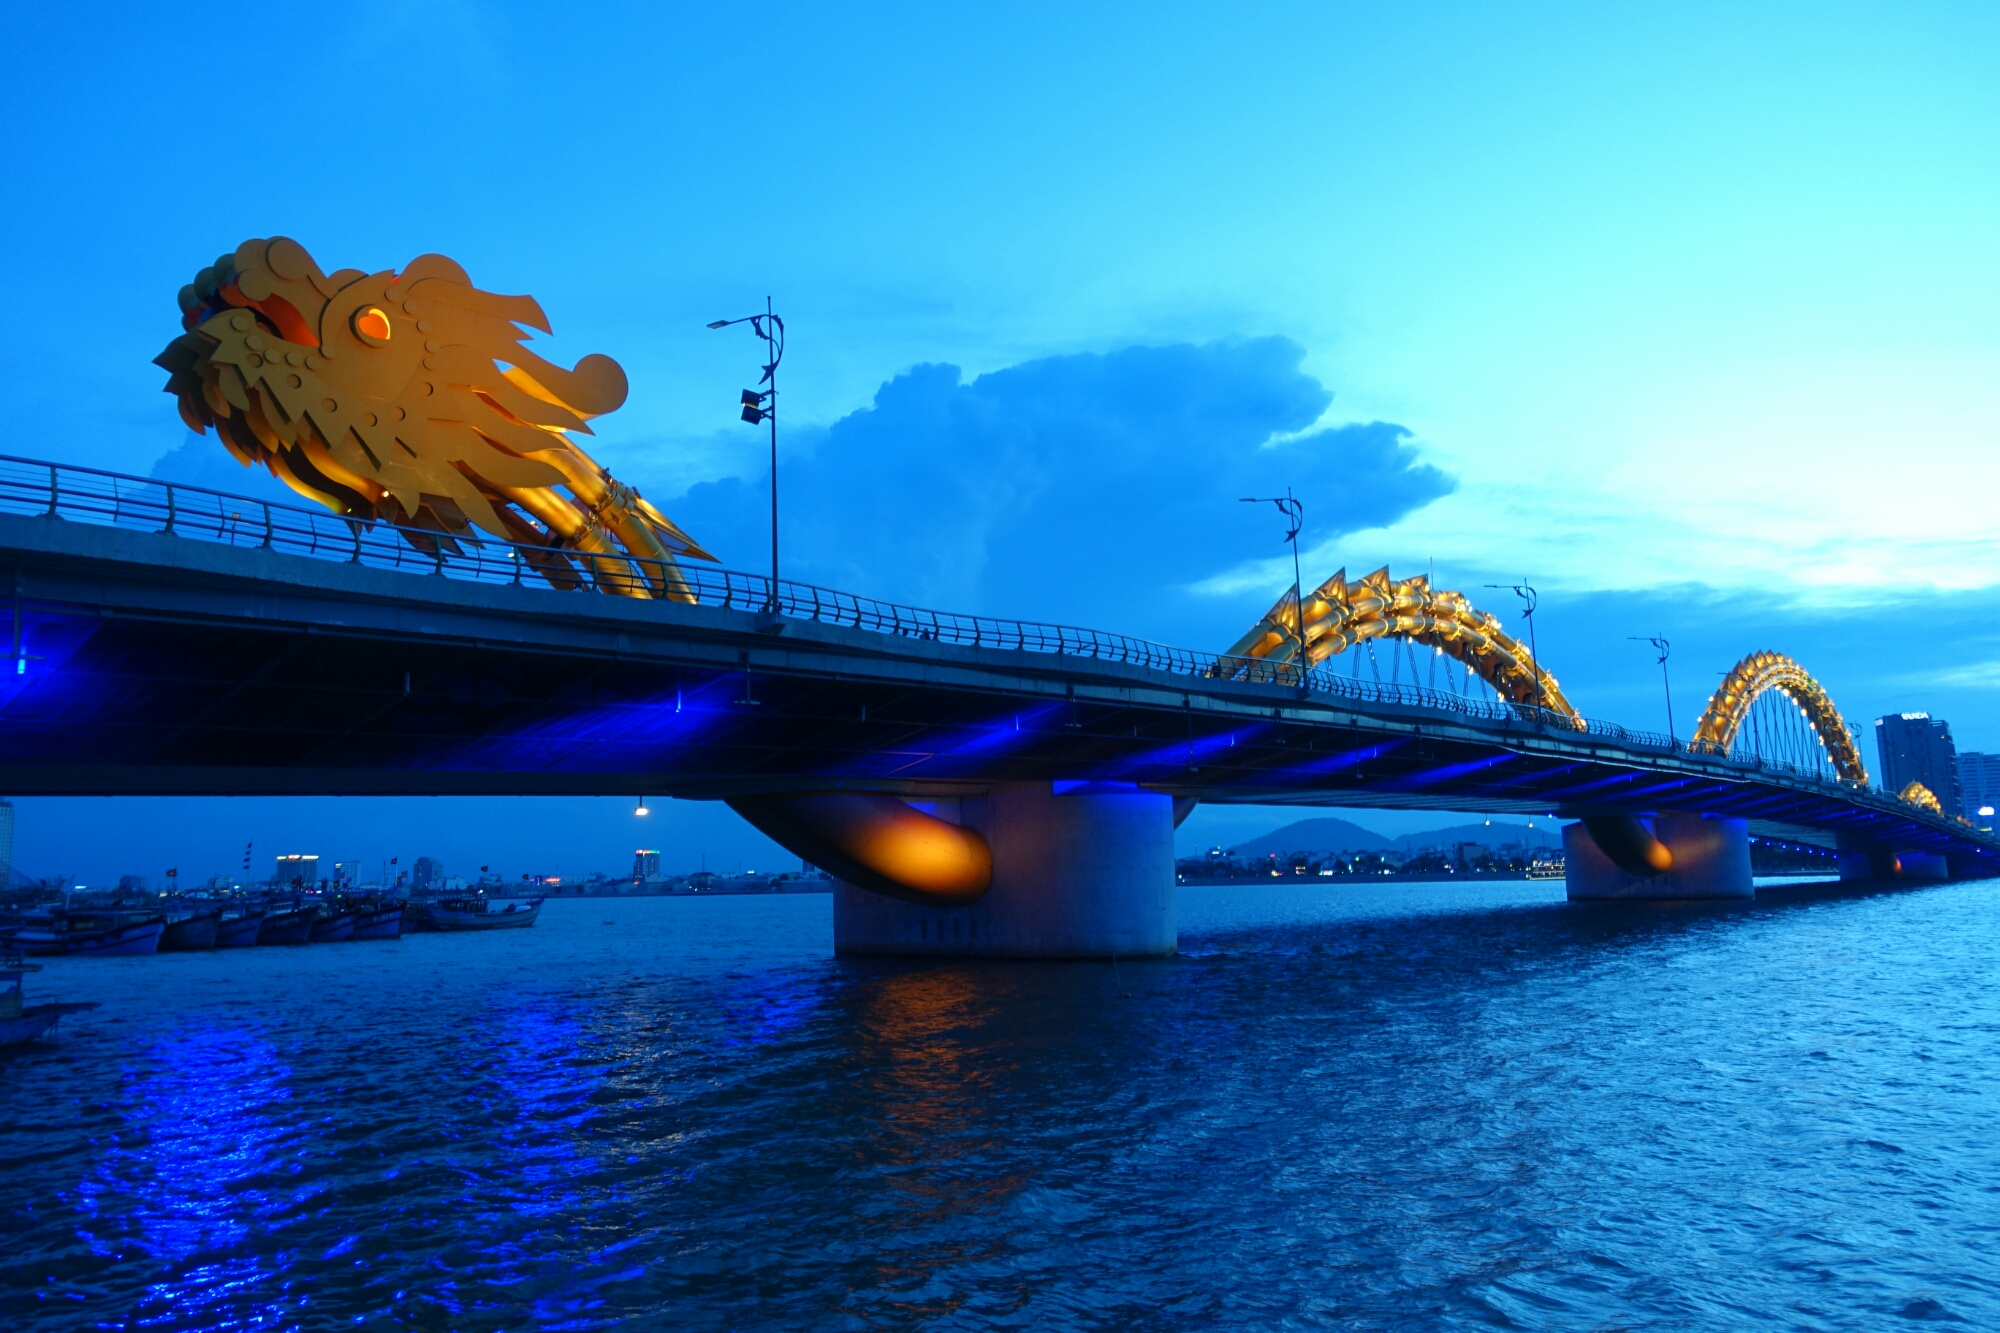 General 2000x1333 architecture bridge water river dragon Danang Vietnam clouds boat lights evening cityscape Asia Chinese dragon blue